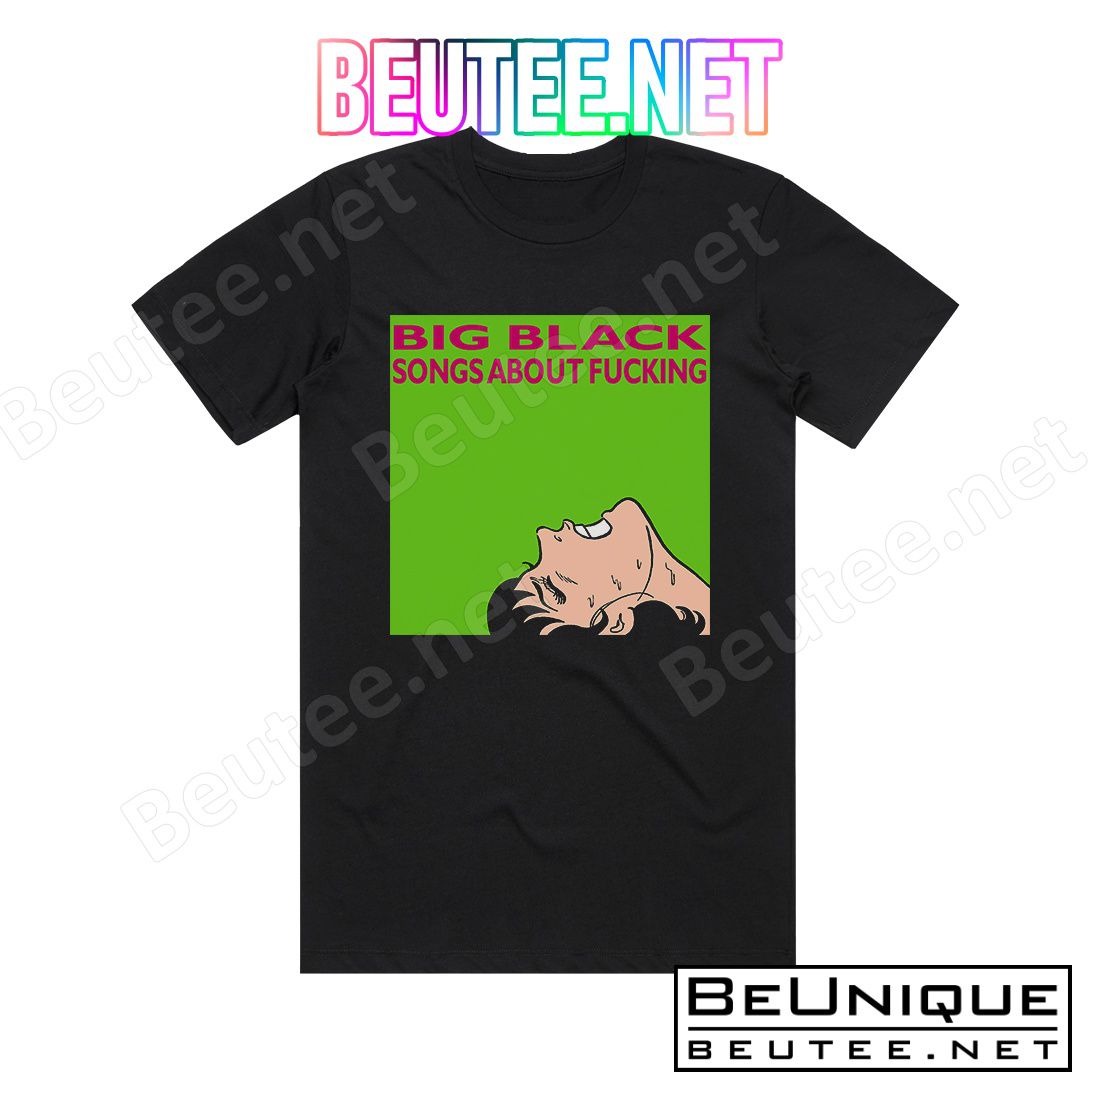 Big Black Songs About Fucking 1 Album Cover T-Shirt